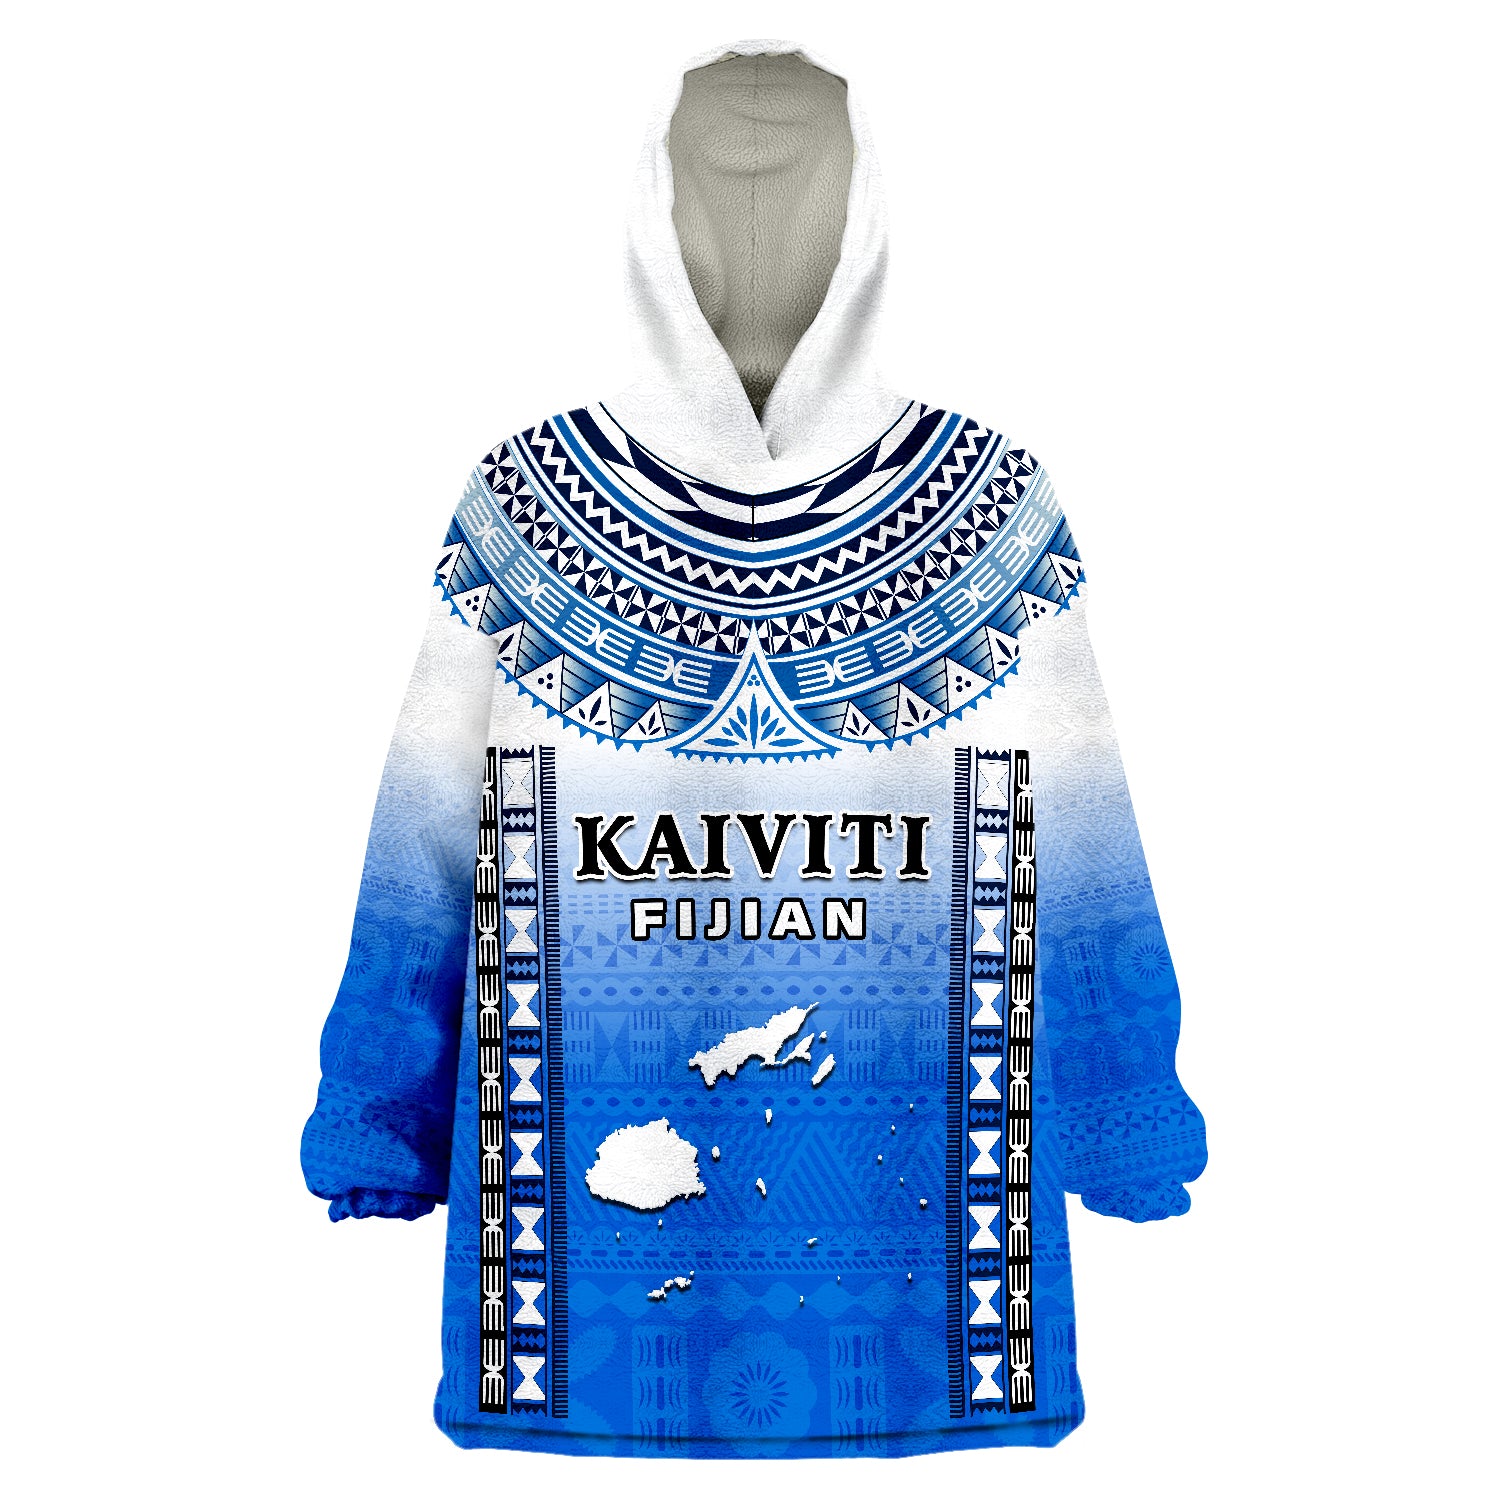 Custom Text And Number Fiji Kaiviti Fijian Special Tapa Pattern Wearable Blanket Hoodie LT14 Unisex One Size - Polynesian Pride